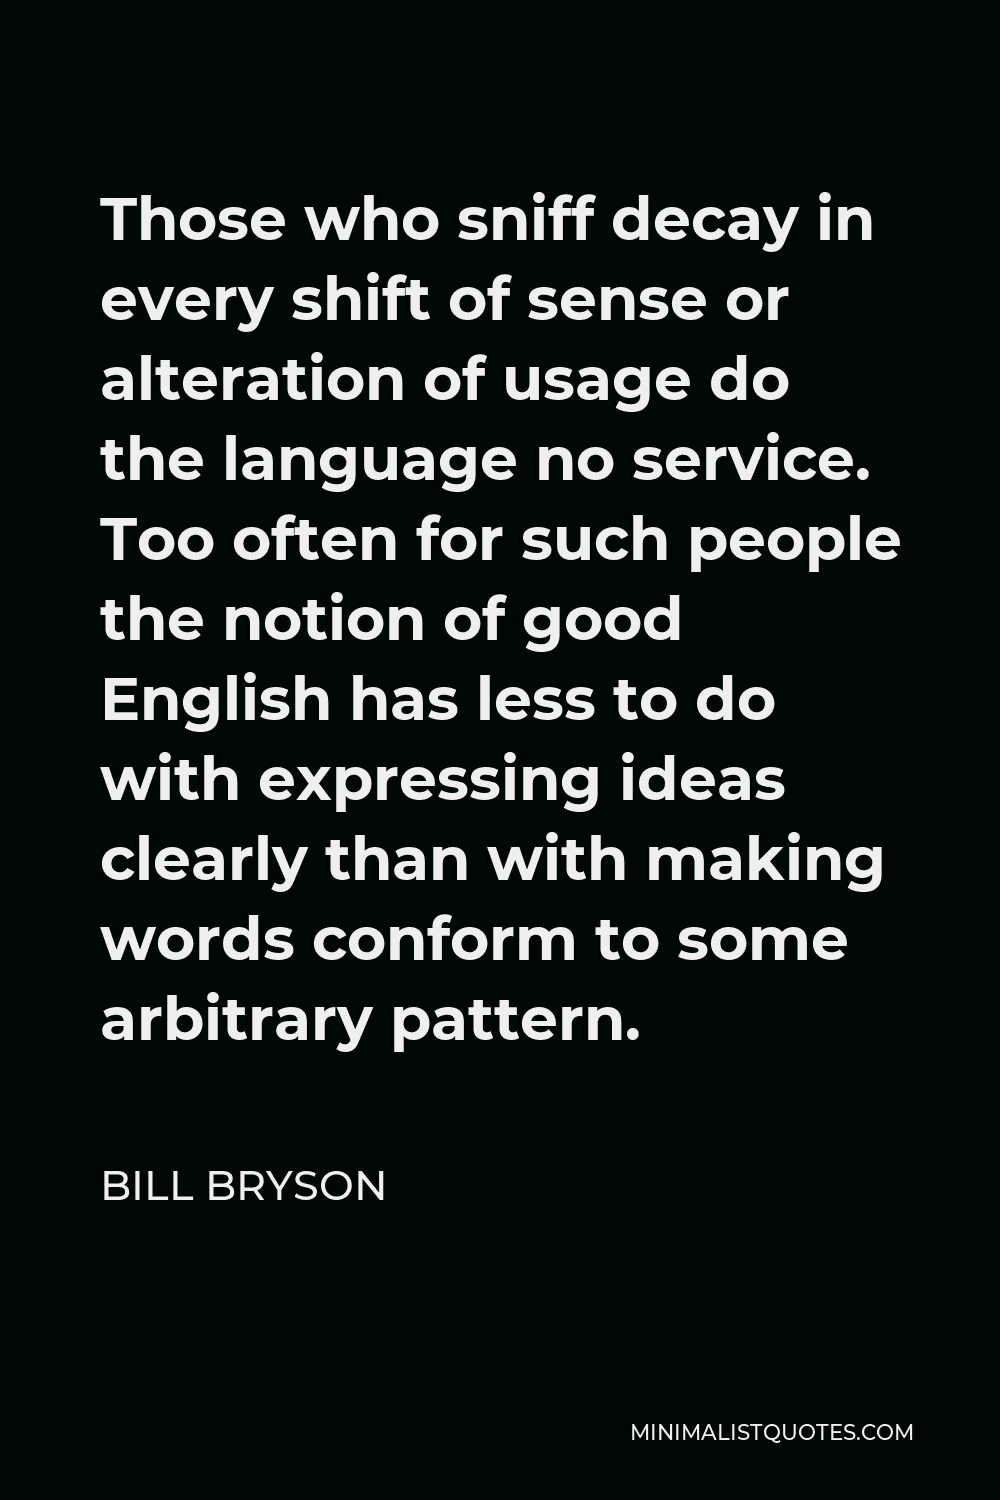 Bill Bryson Quote - Those who sniff decay in every shift of sense or alteration of usage do the language no service. Too often for such people the notion of good English has less to do with expressing ideas clearly than with making words conform to some arbitrary pattern.